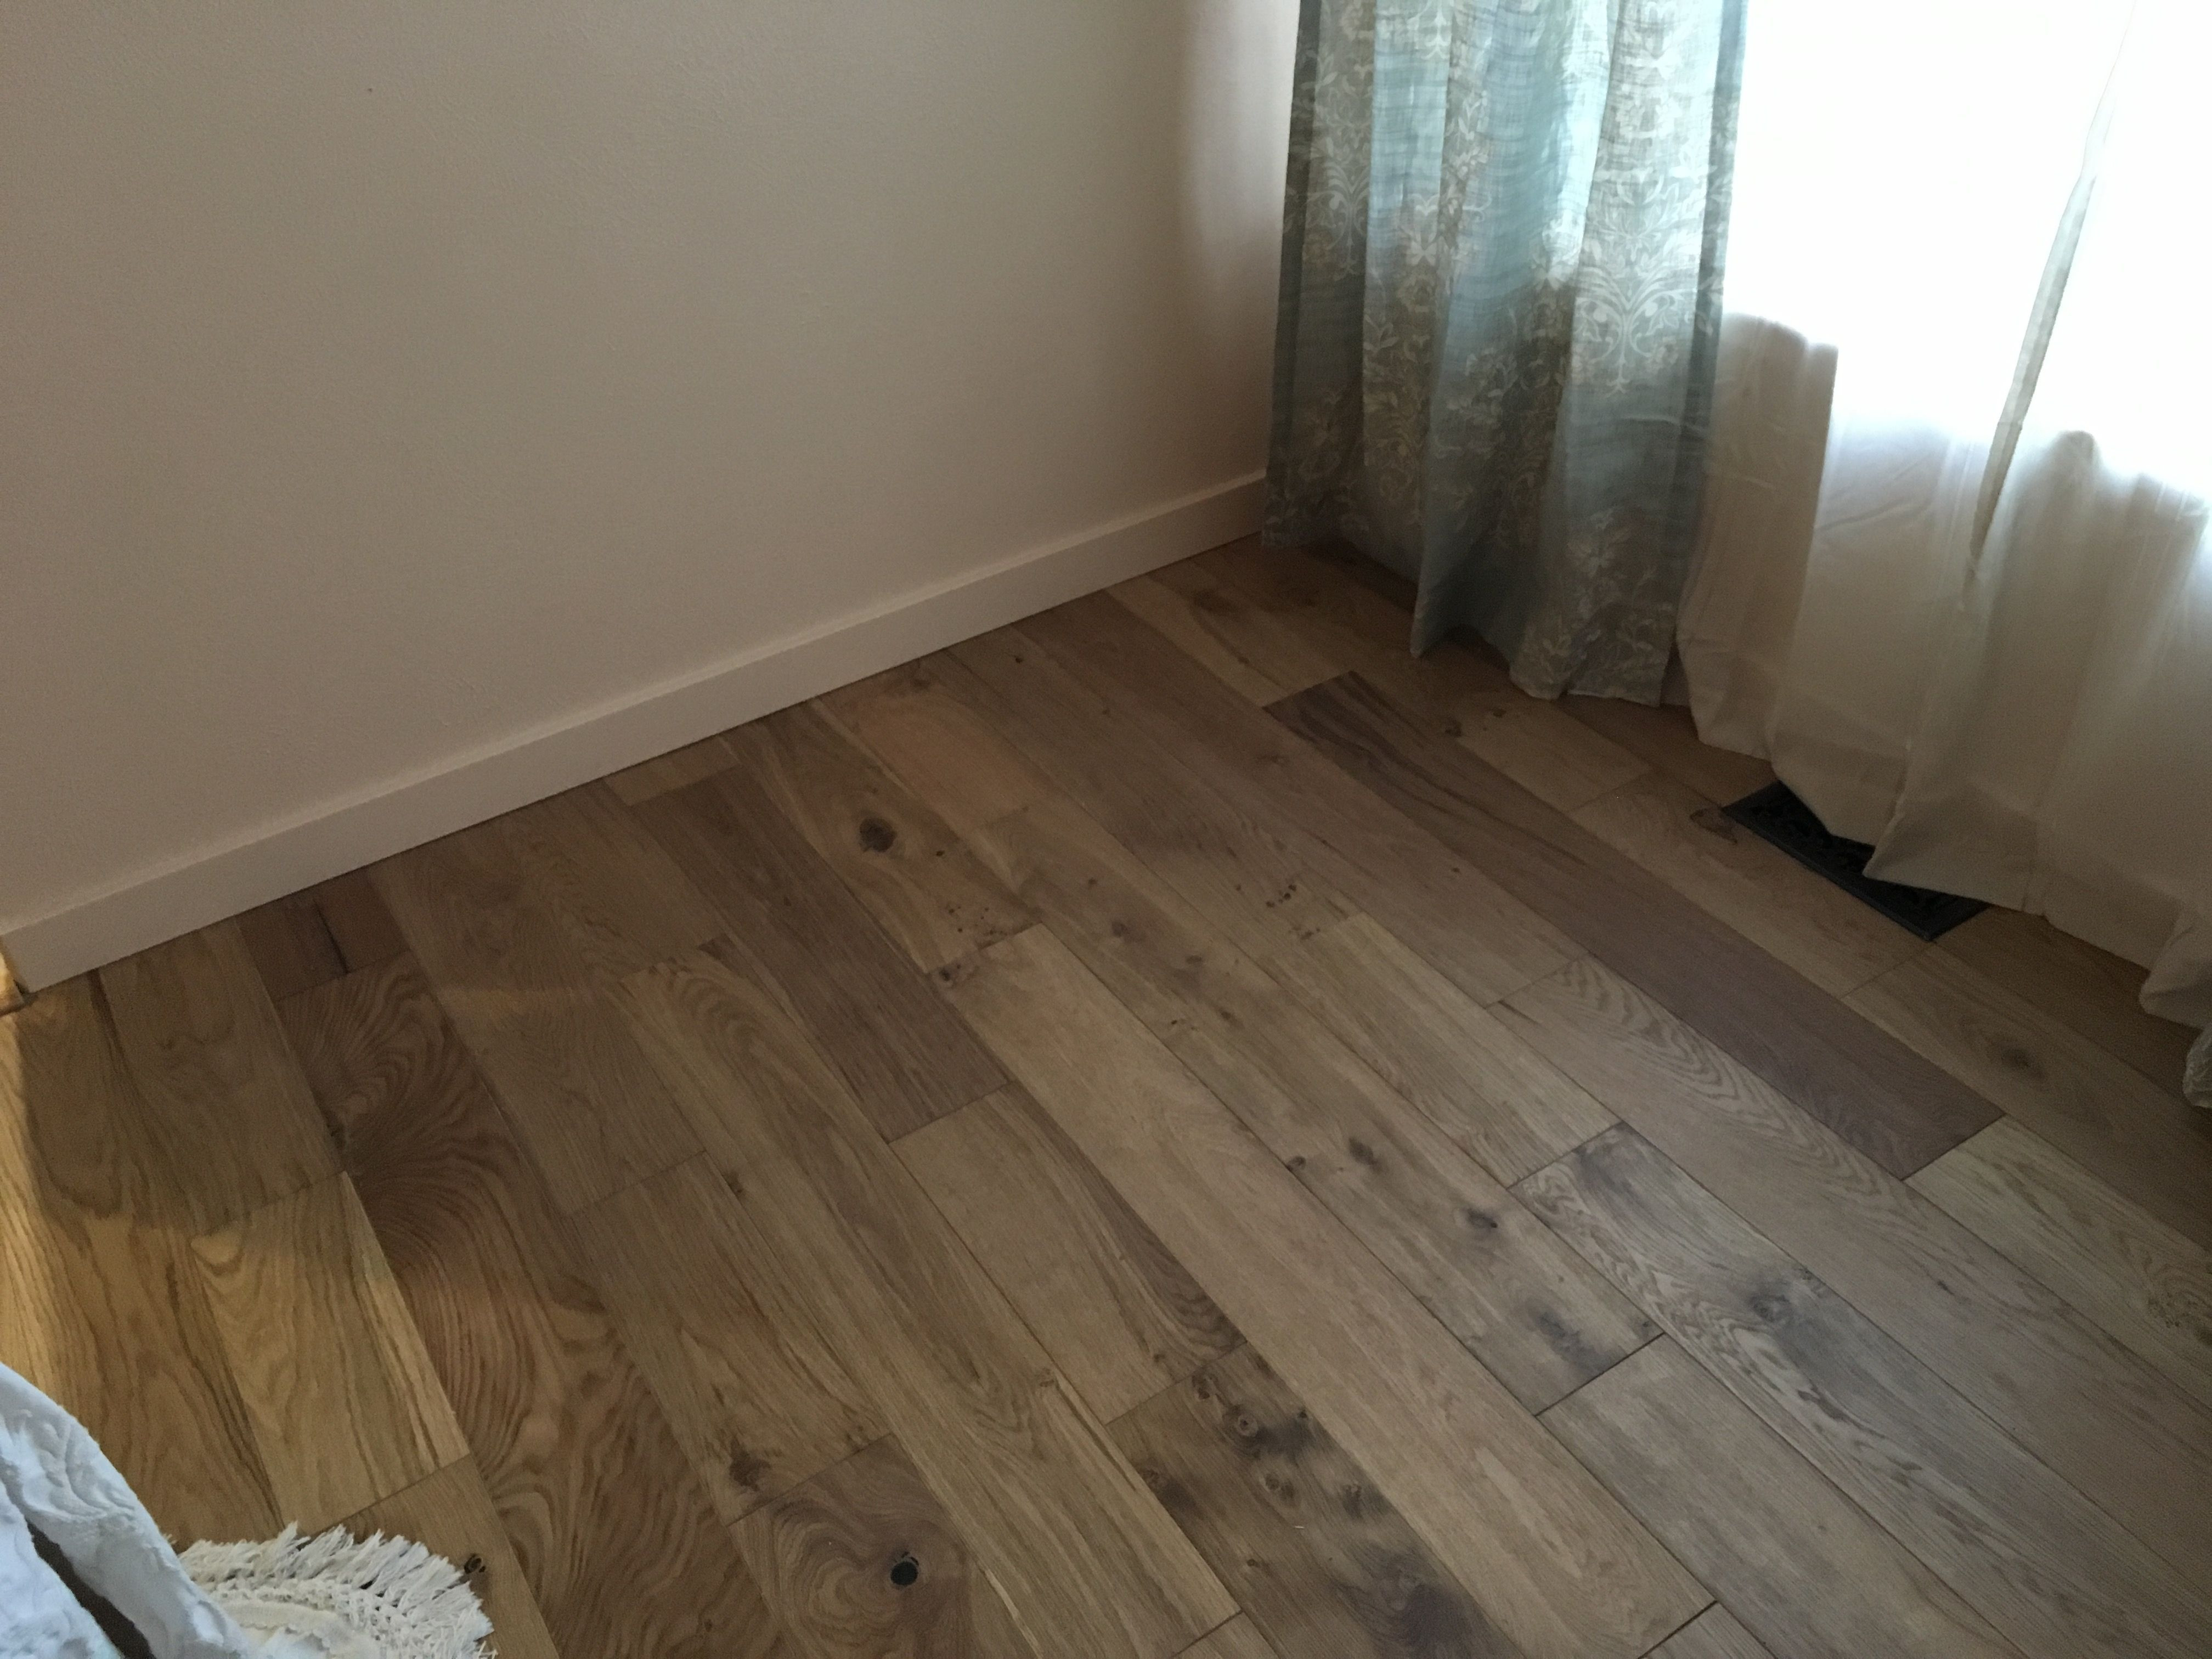 Ss Hardwood Floor Supply Los Angeles Ca Of High Country Collection Oak Natural Engineered Wood Floor Lilly Pertaining to High Country Collection Oak Natural Engineered Wood Floor